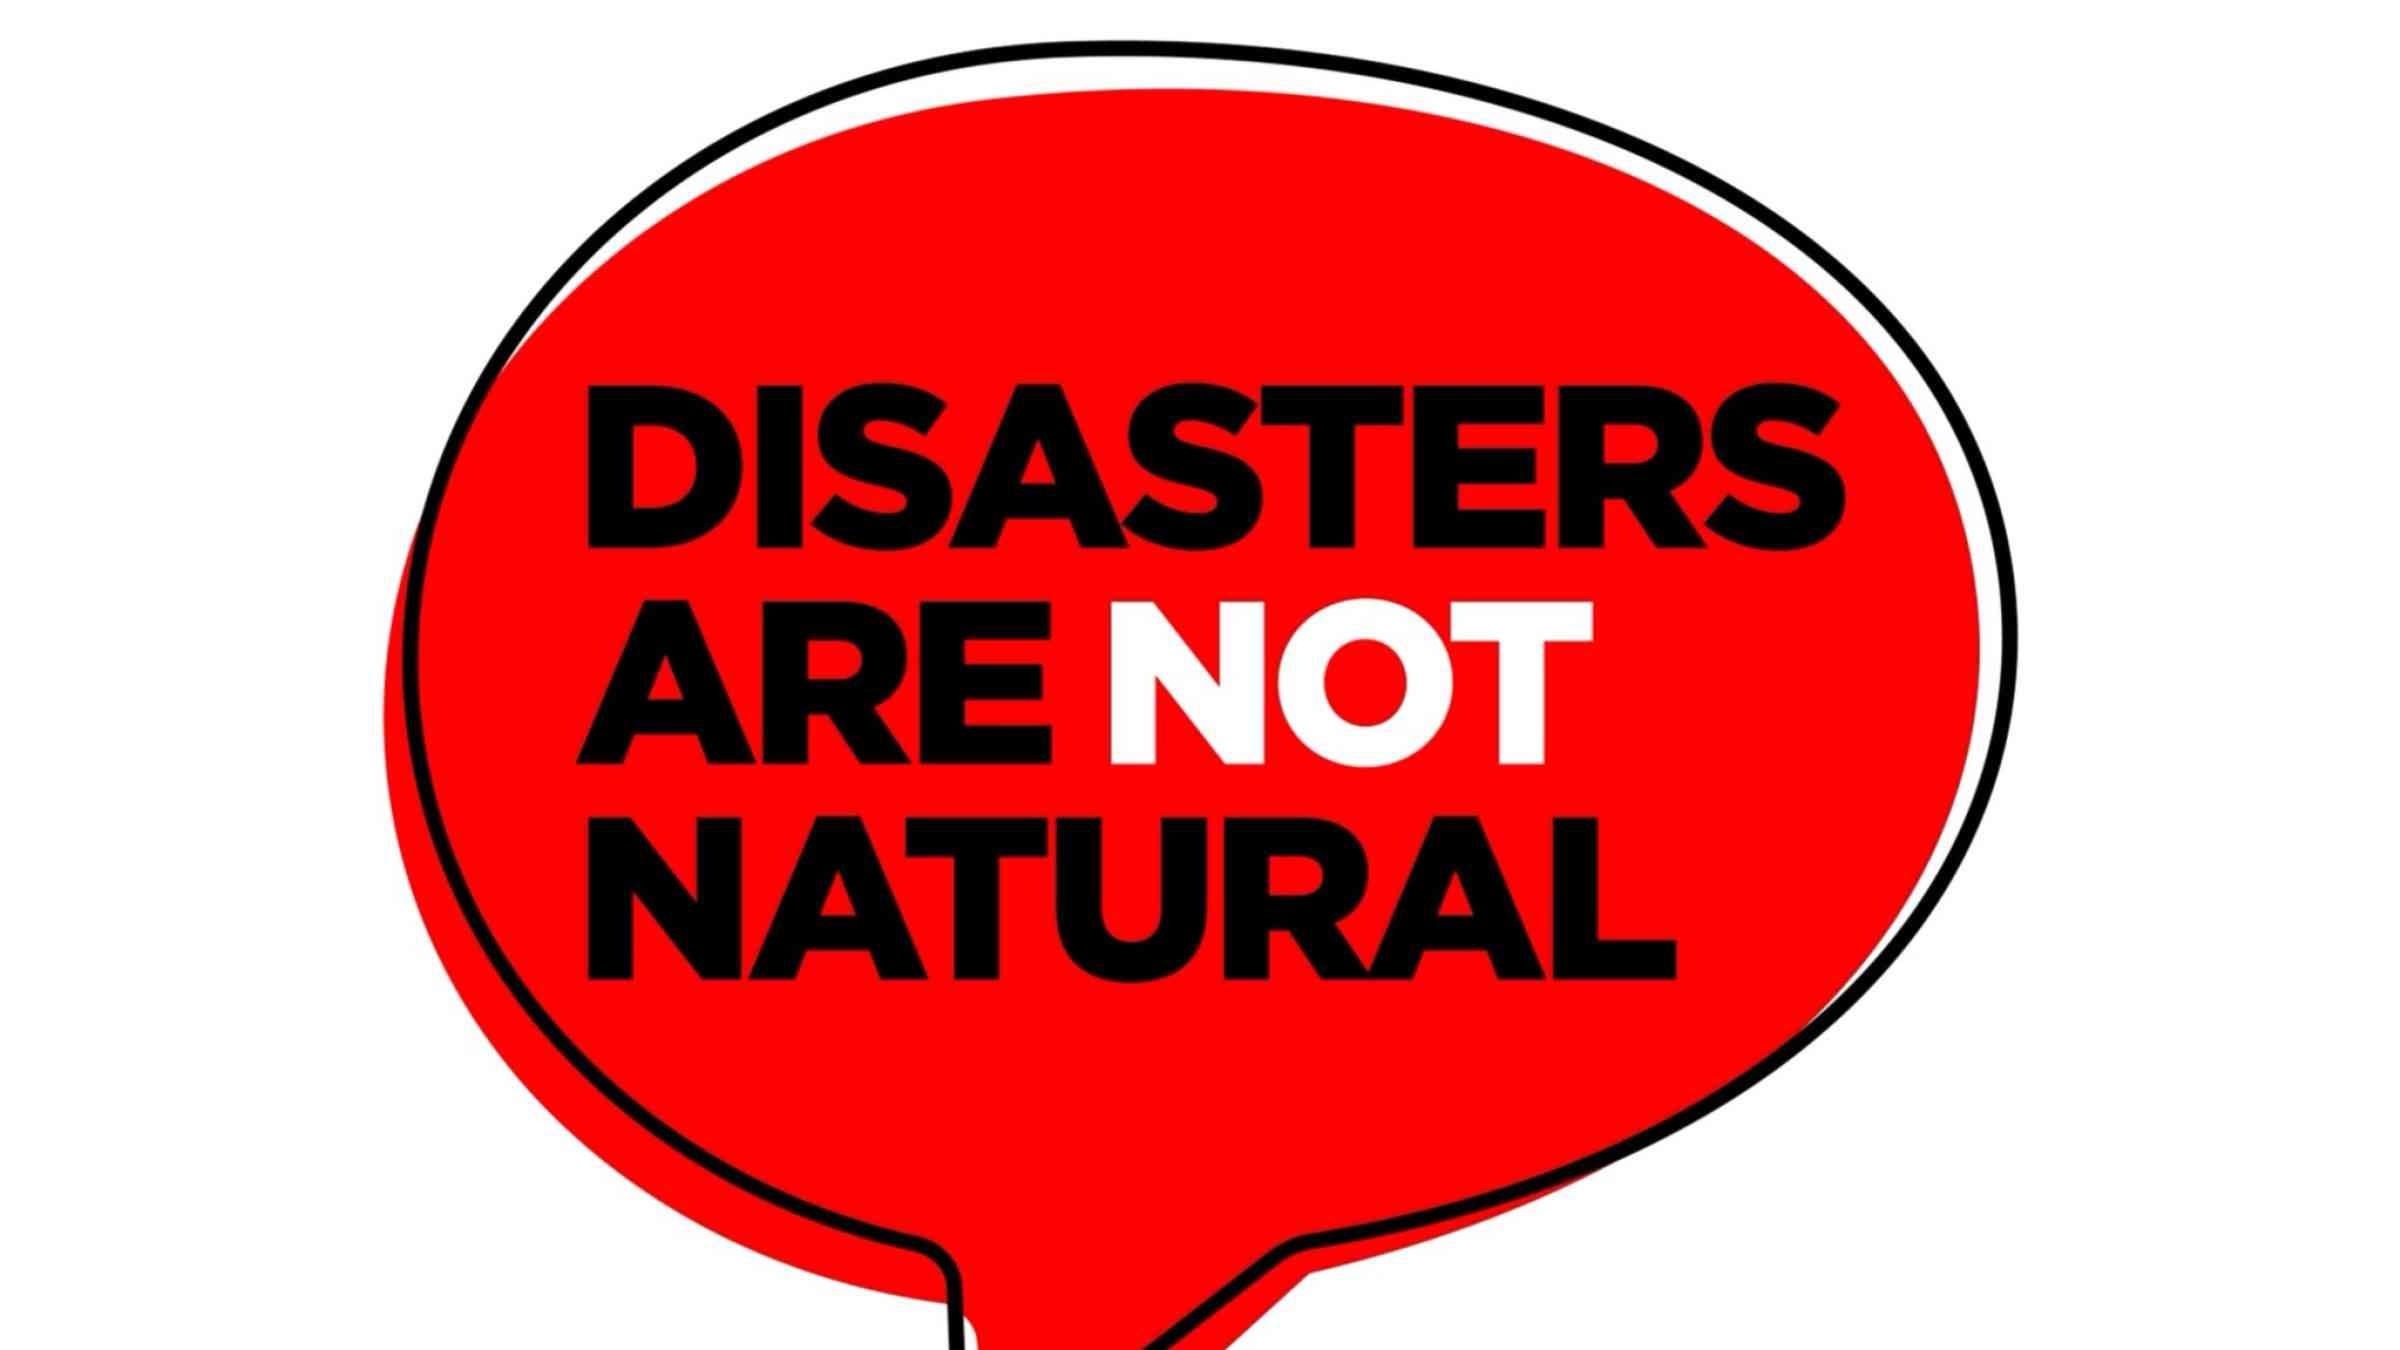 Disasters are not natural